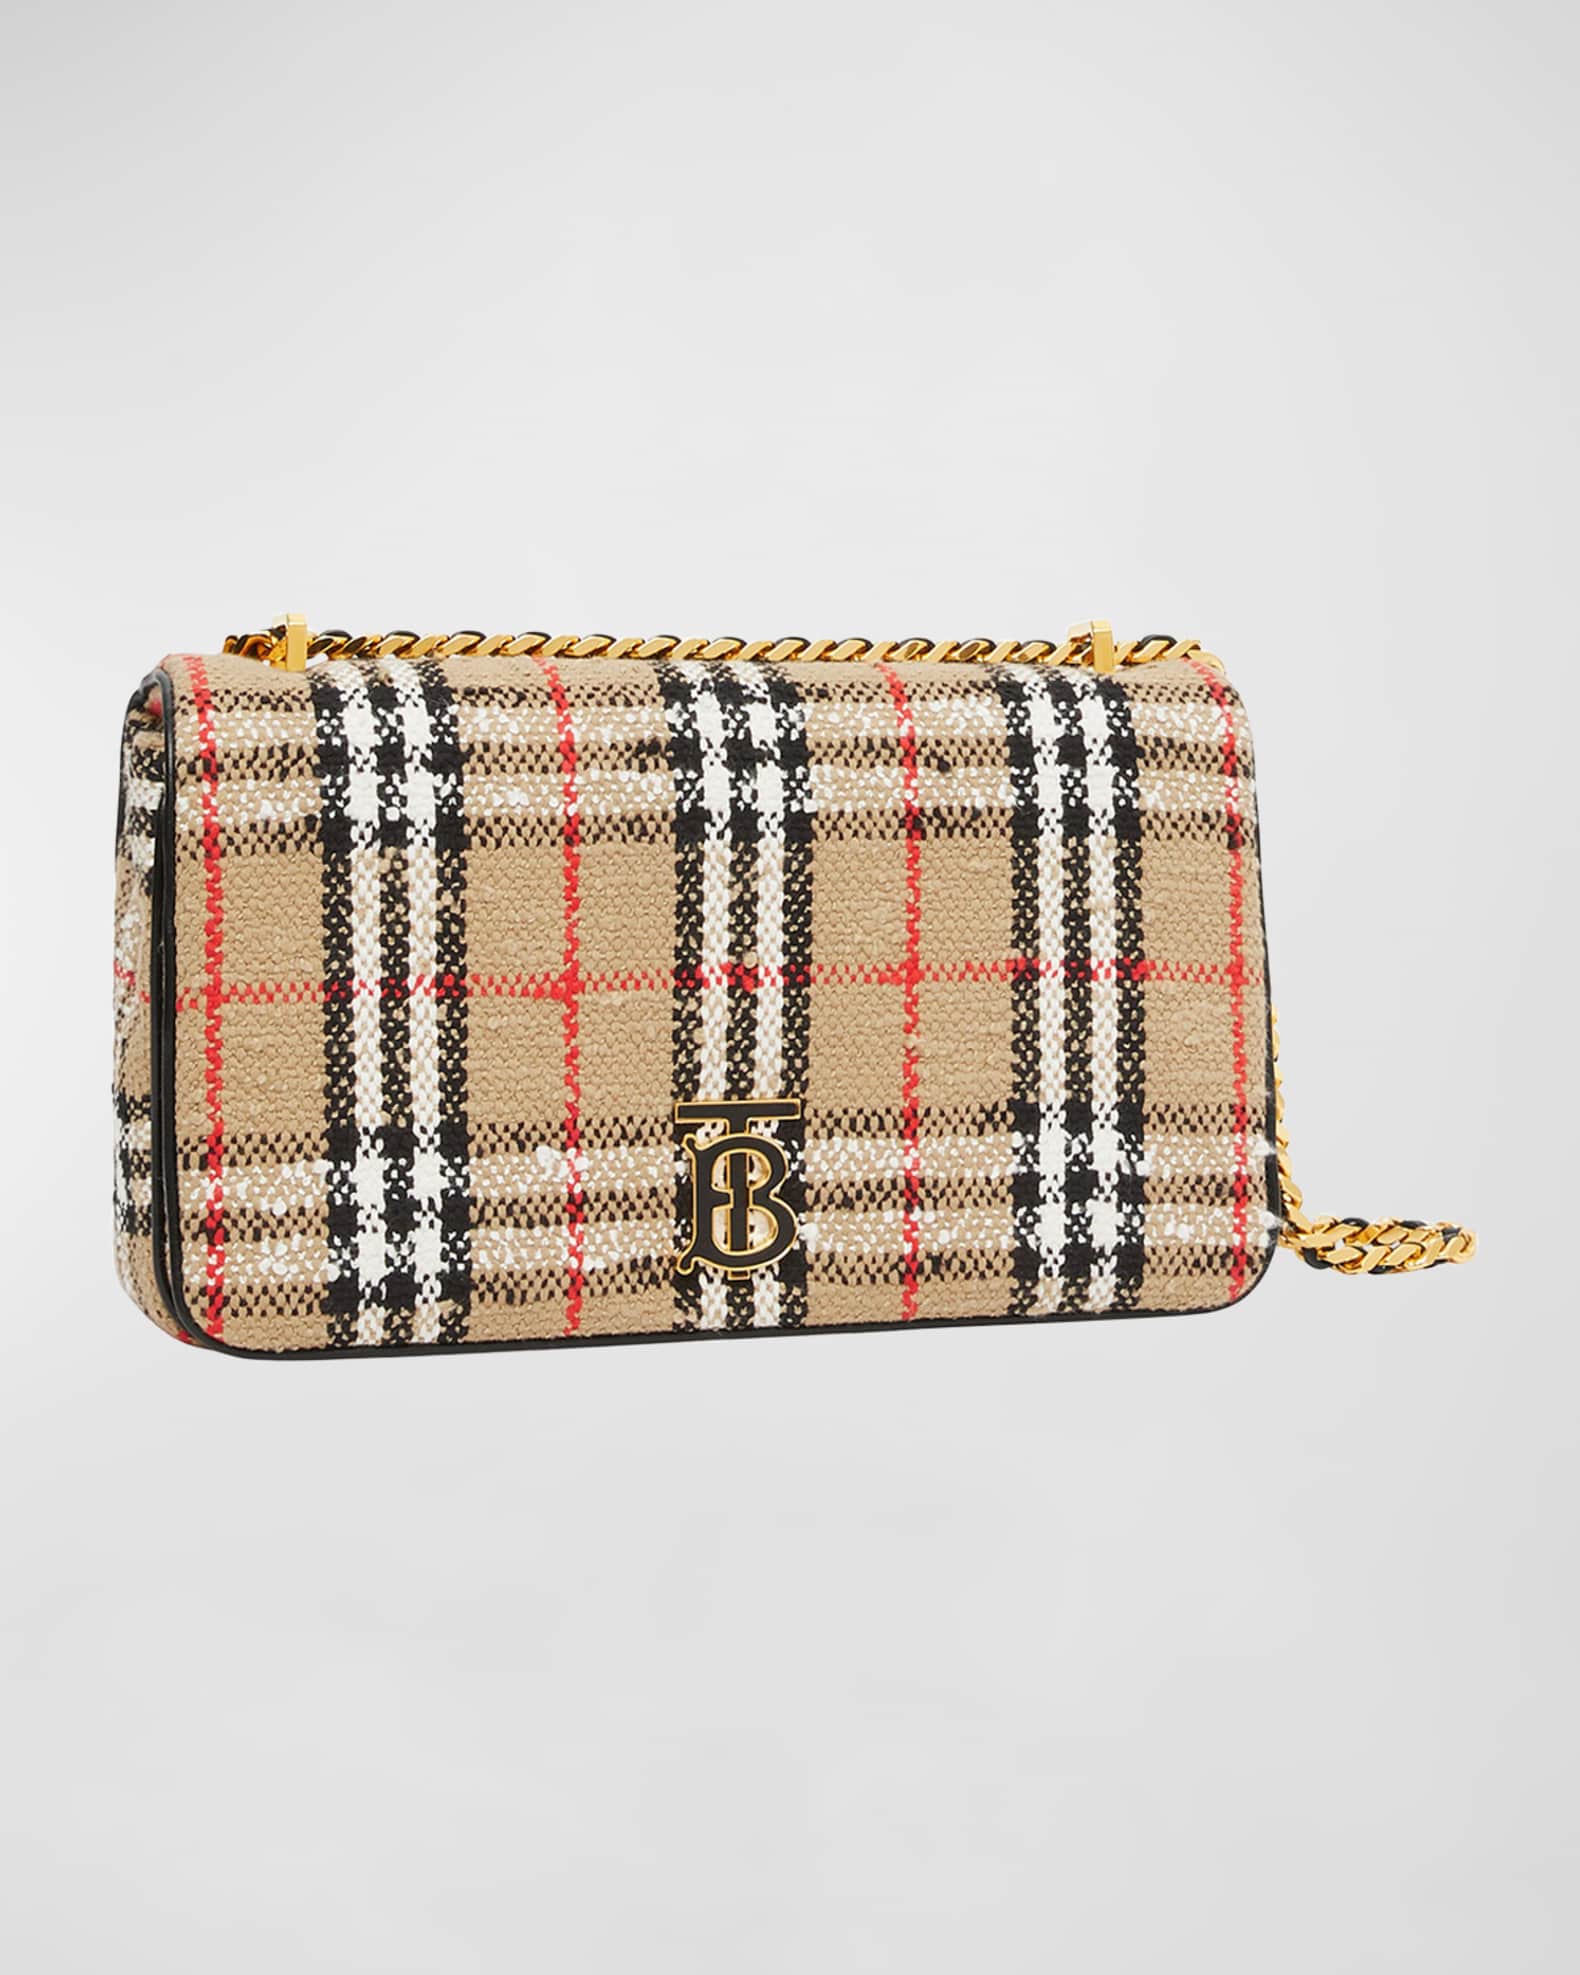 Women's Envelope Clutch Bag Vintage Plaid Pattern, Large Capacity For  Casual Use